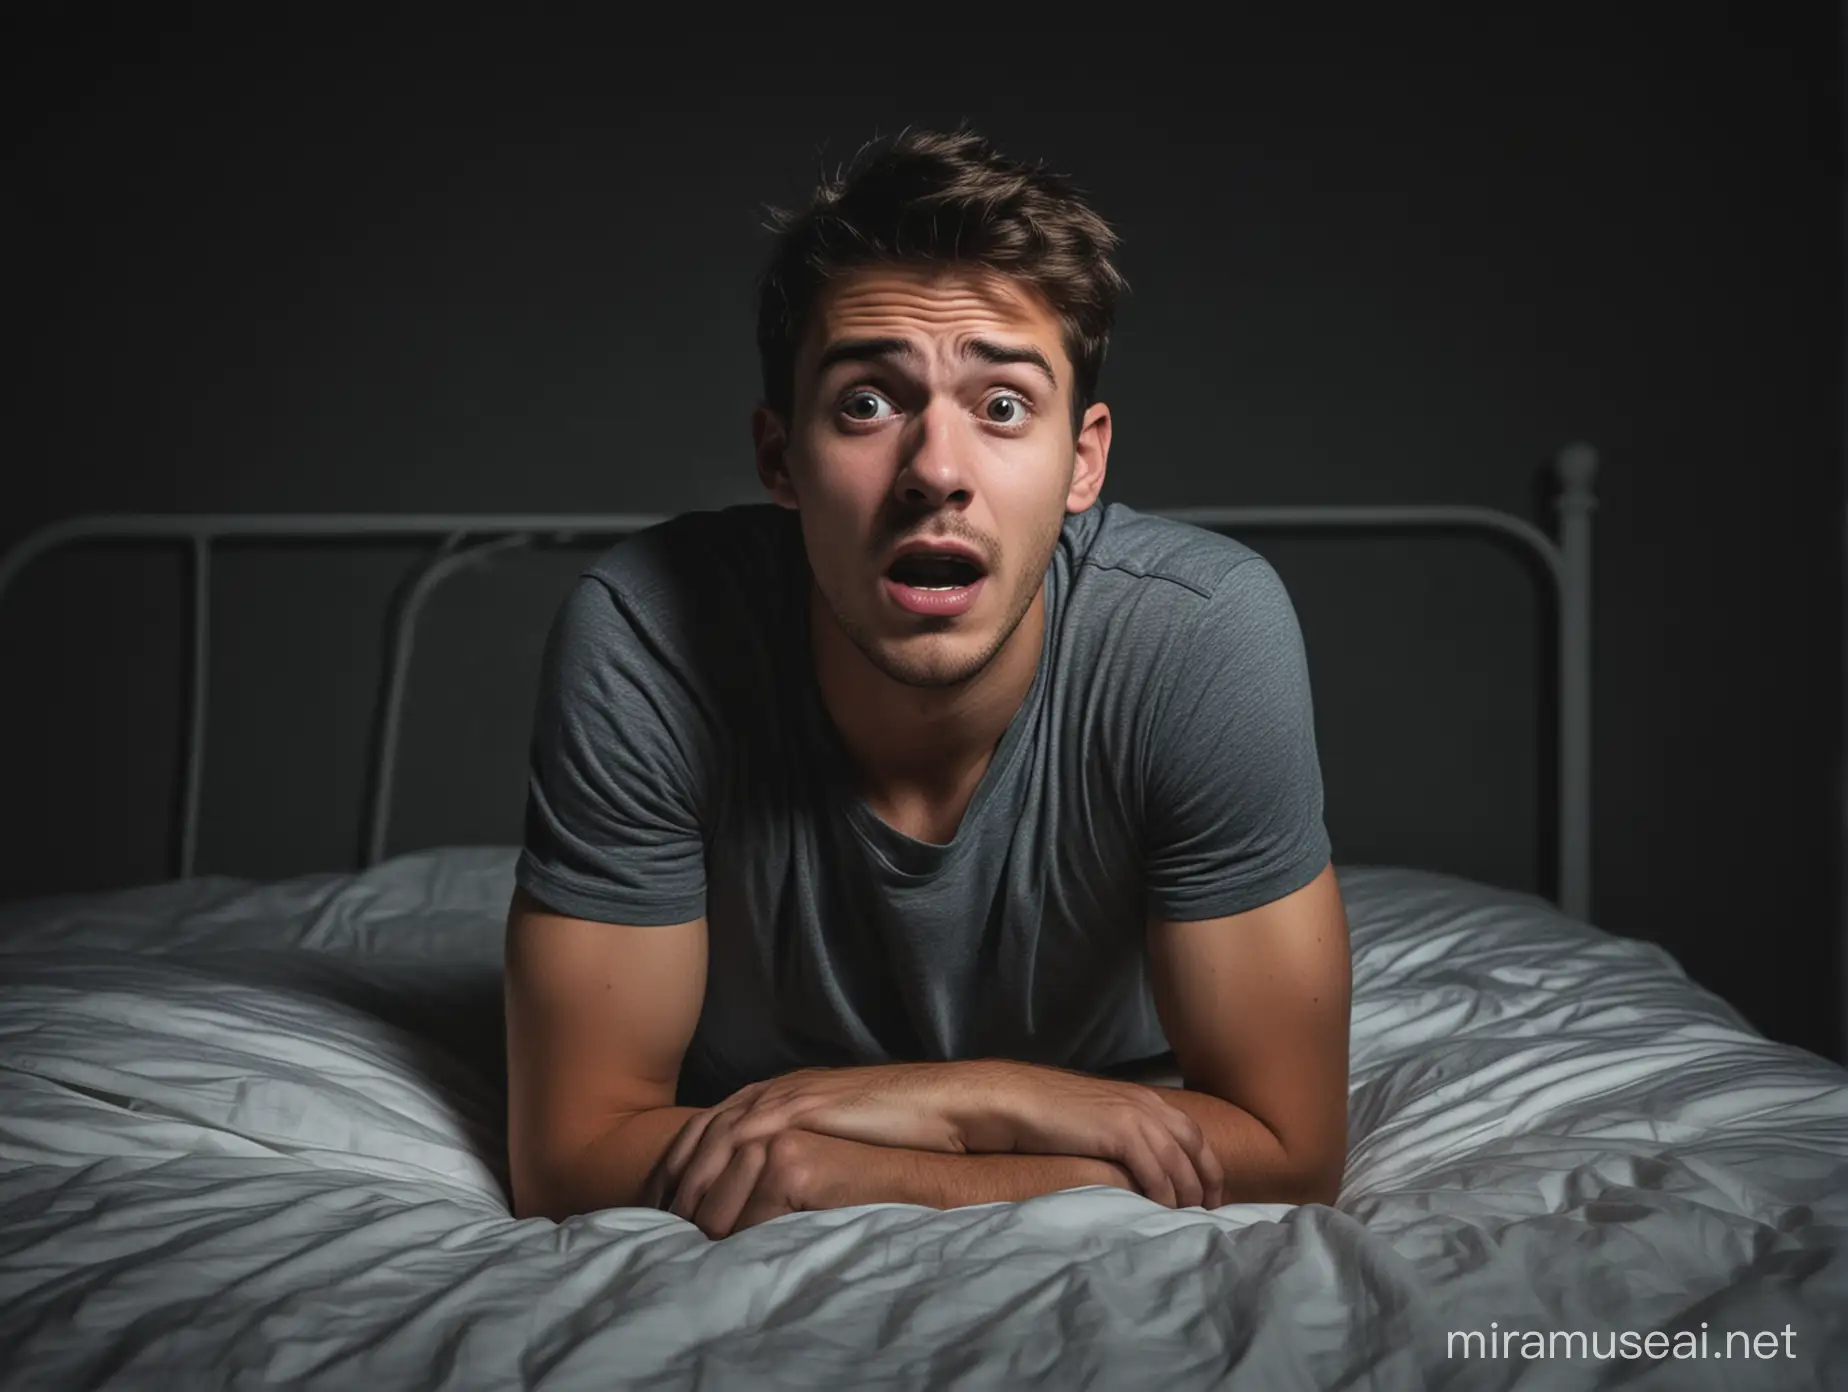 Anxious Young Man Alone in Dark Bedroom at Night